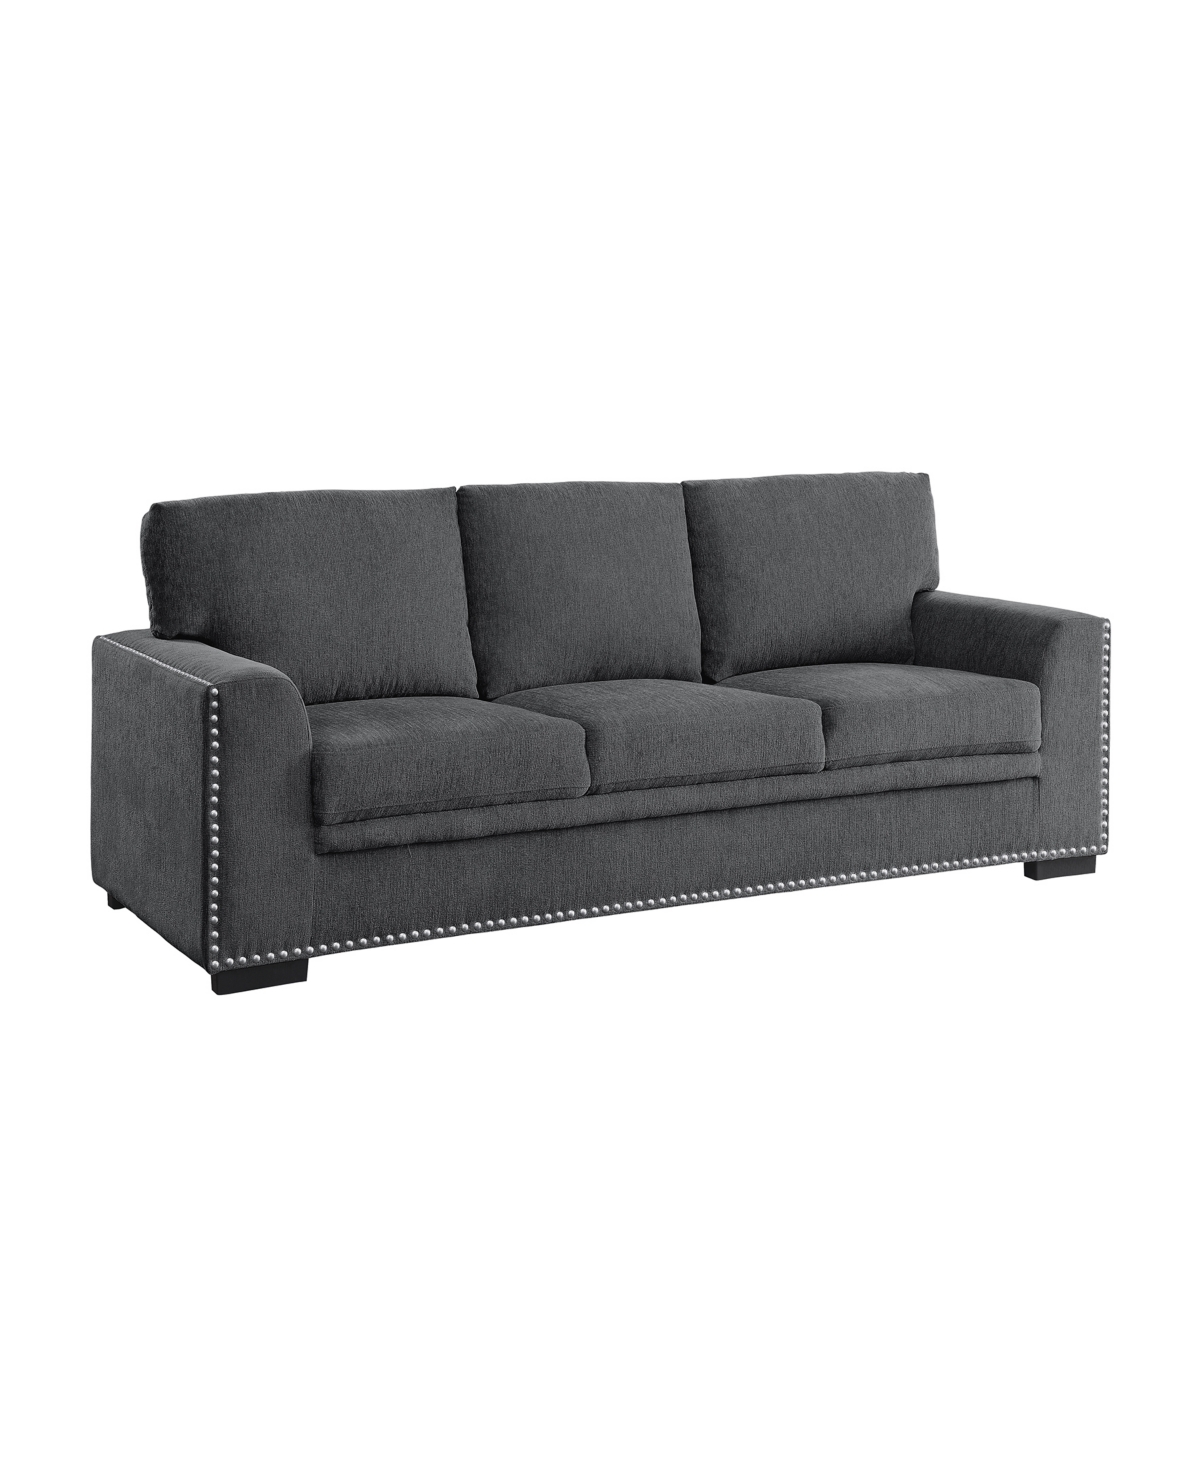 Homelegance White Label Dickinson 84" Sofa In Charcoal